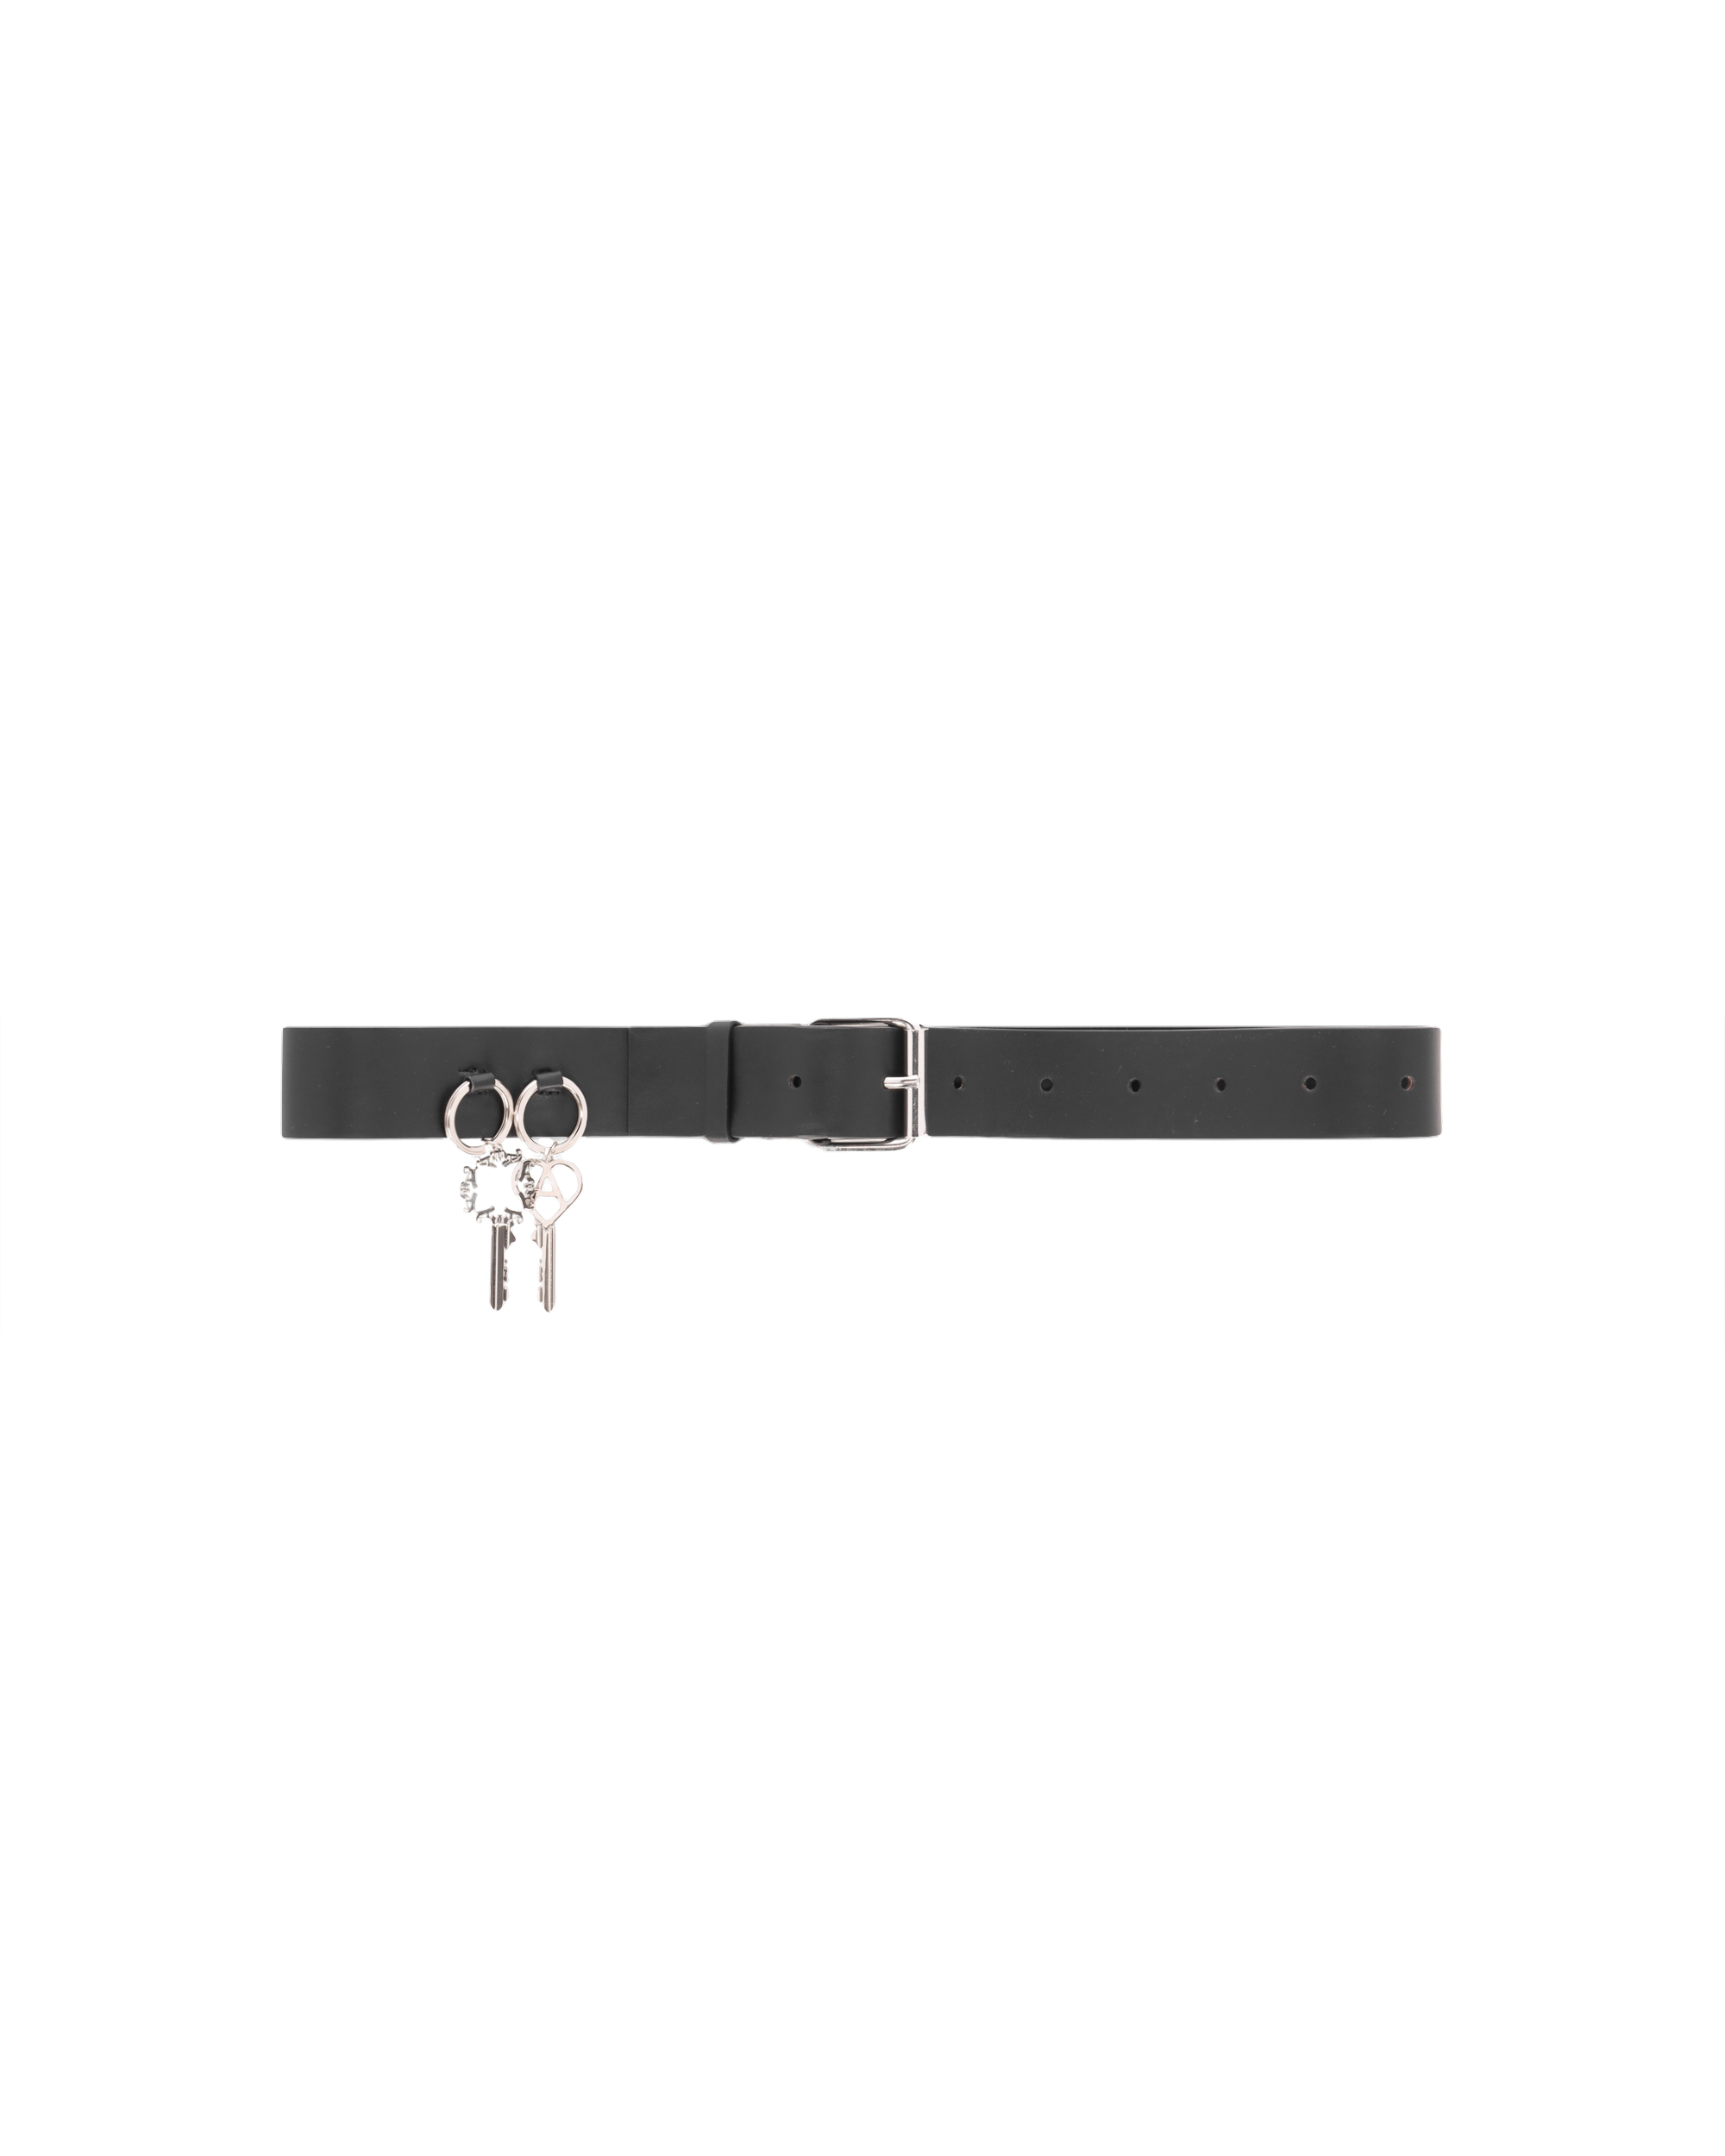 LEATHER BELT WITH KEY CHARMS